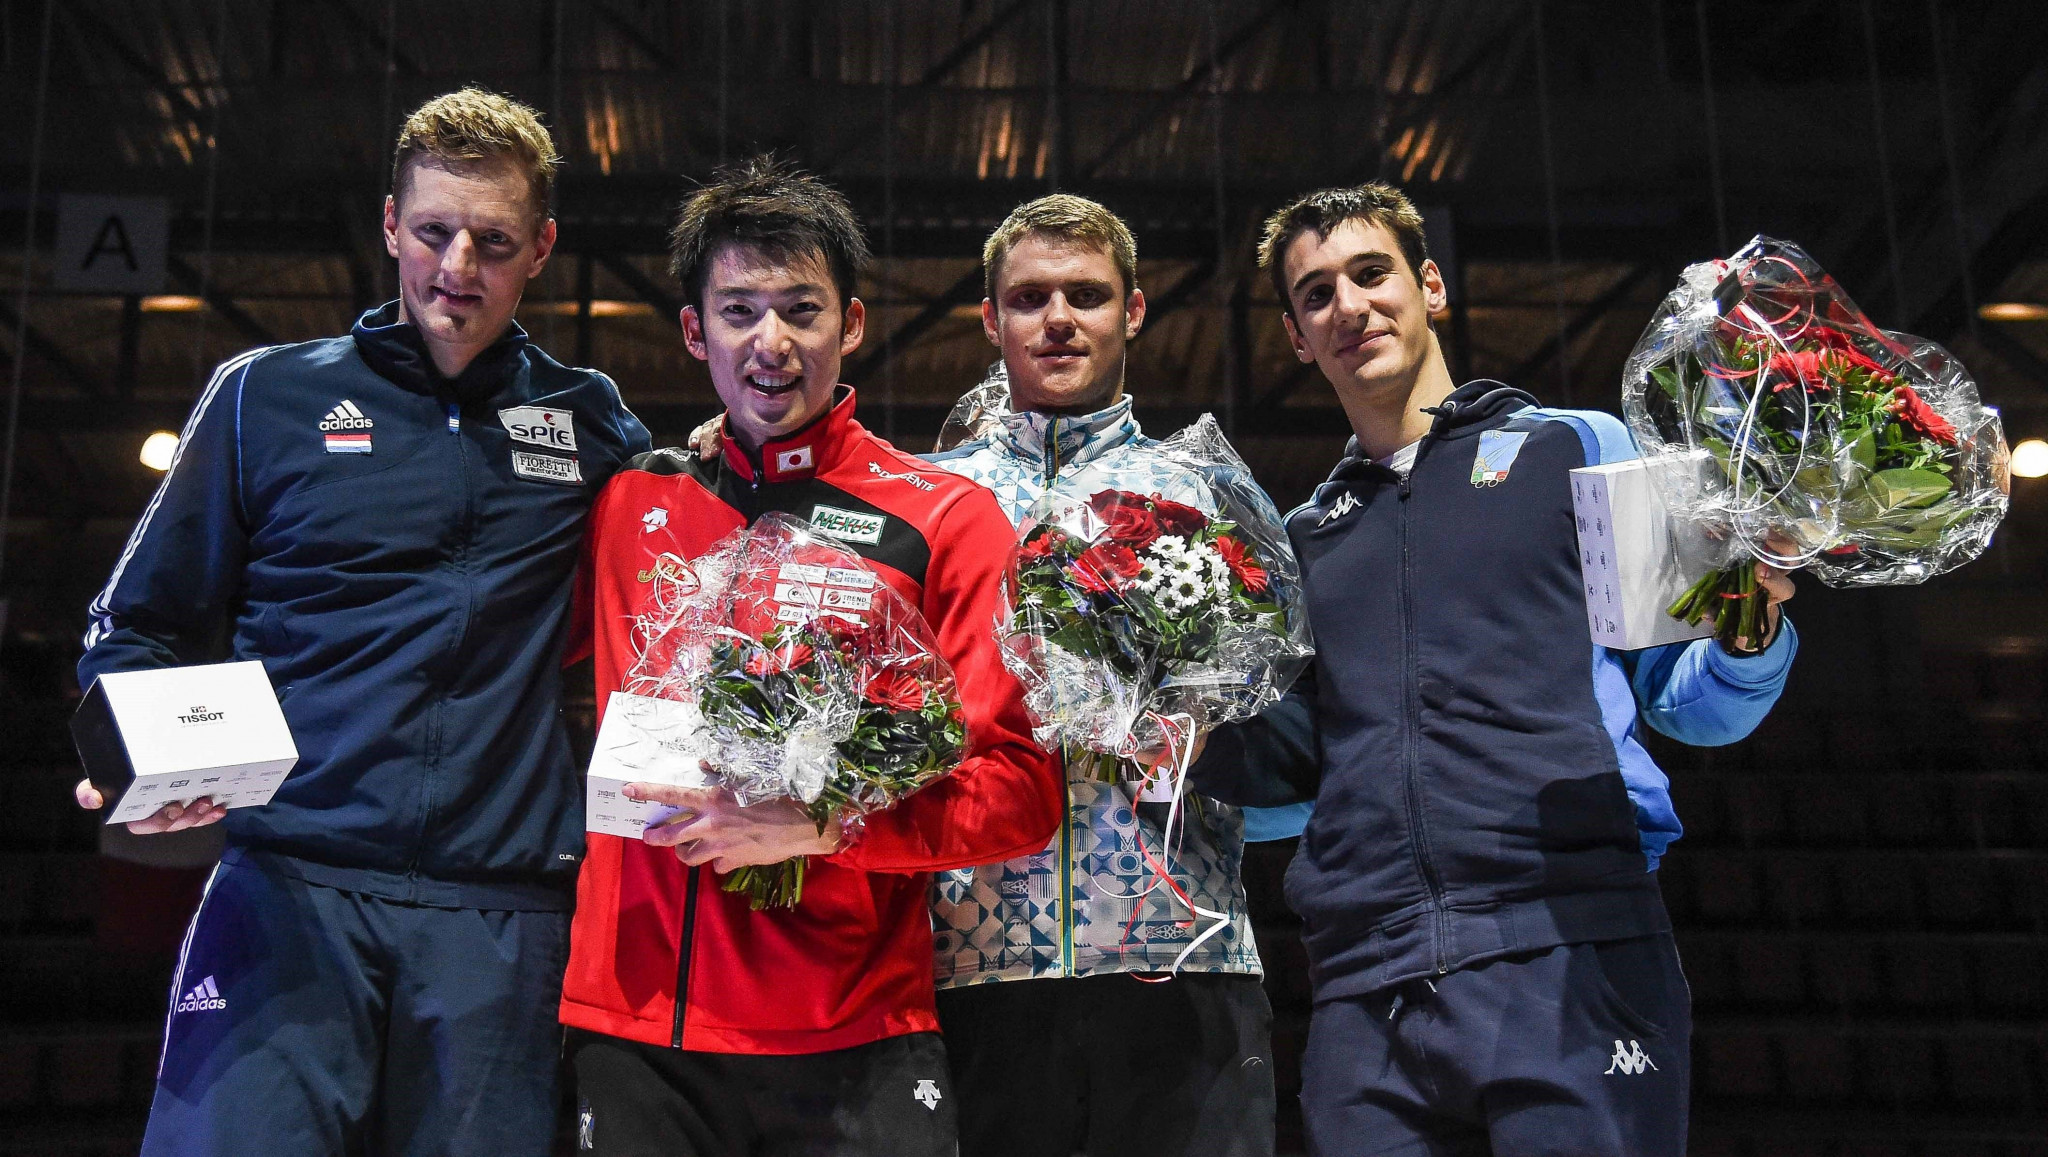 Japan’s Kazuyasu Minobe, second from left, won the individual gold medal at the International Fencing Federation Men’s Épée World Cup in Berne ©FIE